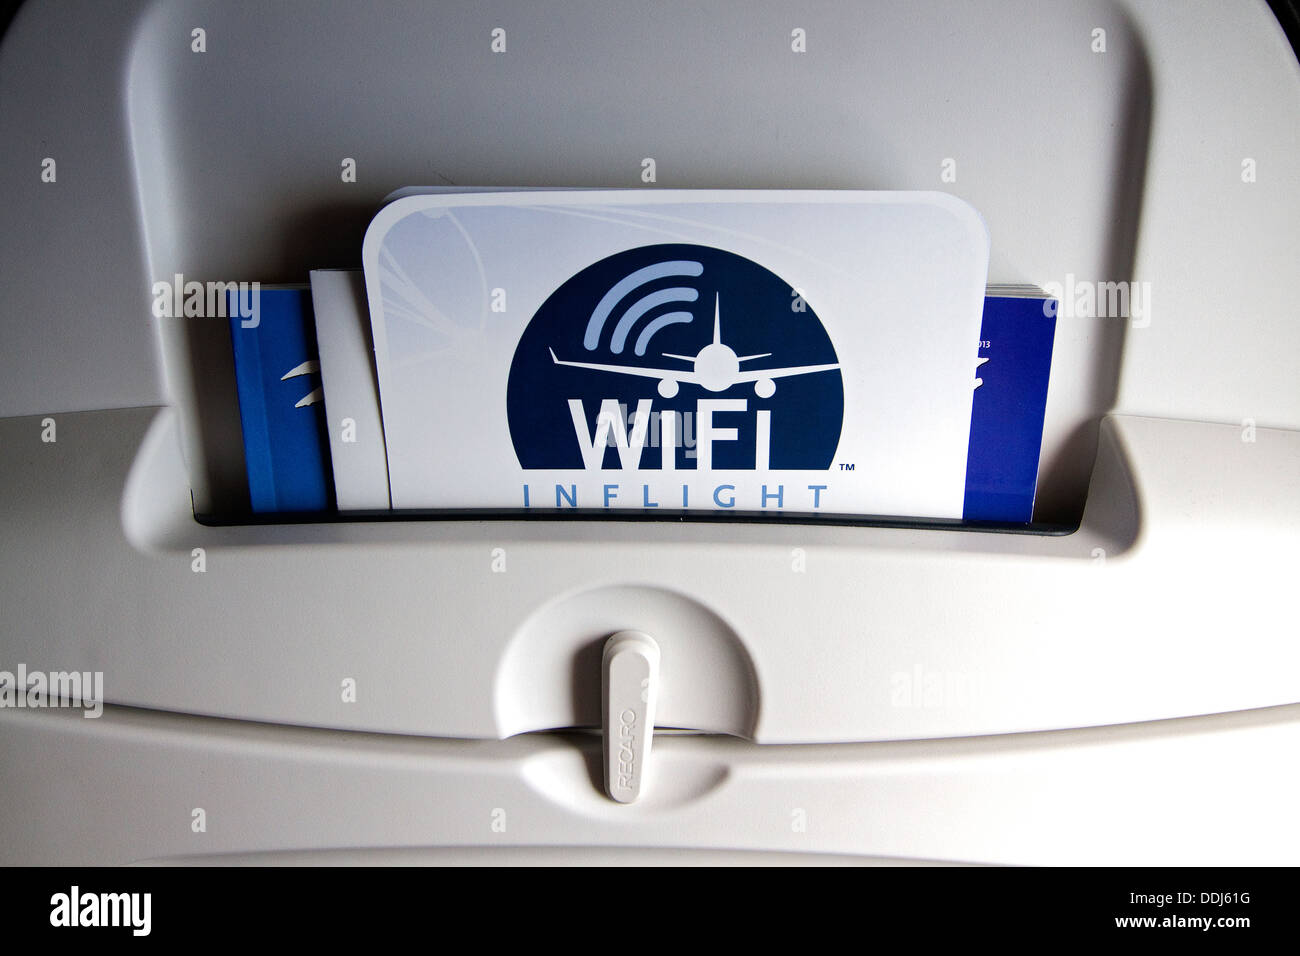 Inflight WiFi advertised on the back of airplane seat. WiFi the next generation of inflight entertainment. Stock Photo